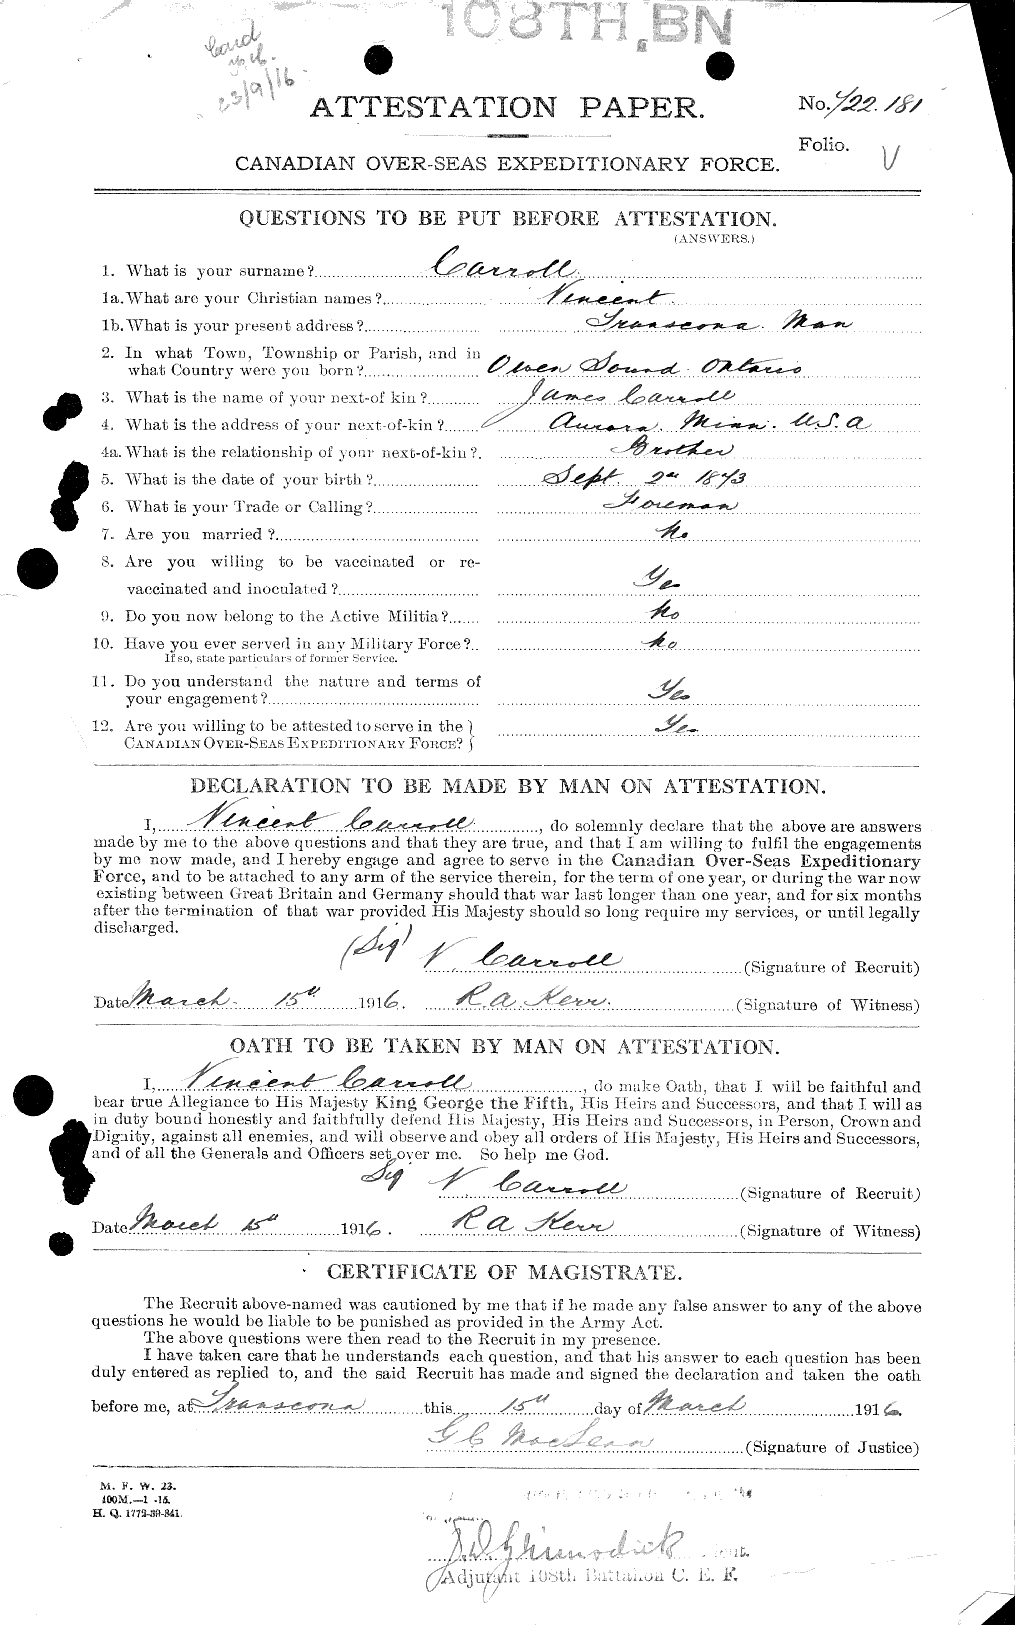 Personnel Records of the First World War - CEF 005737a